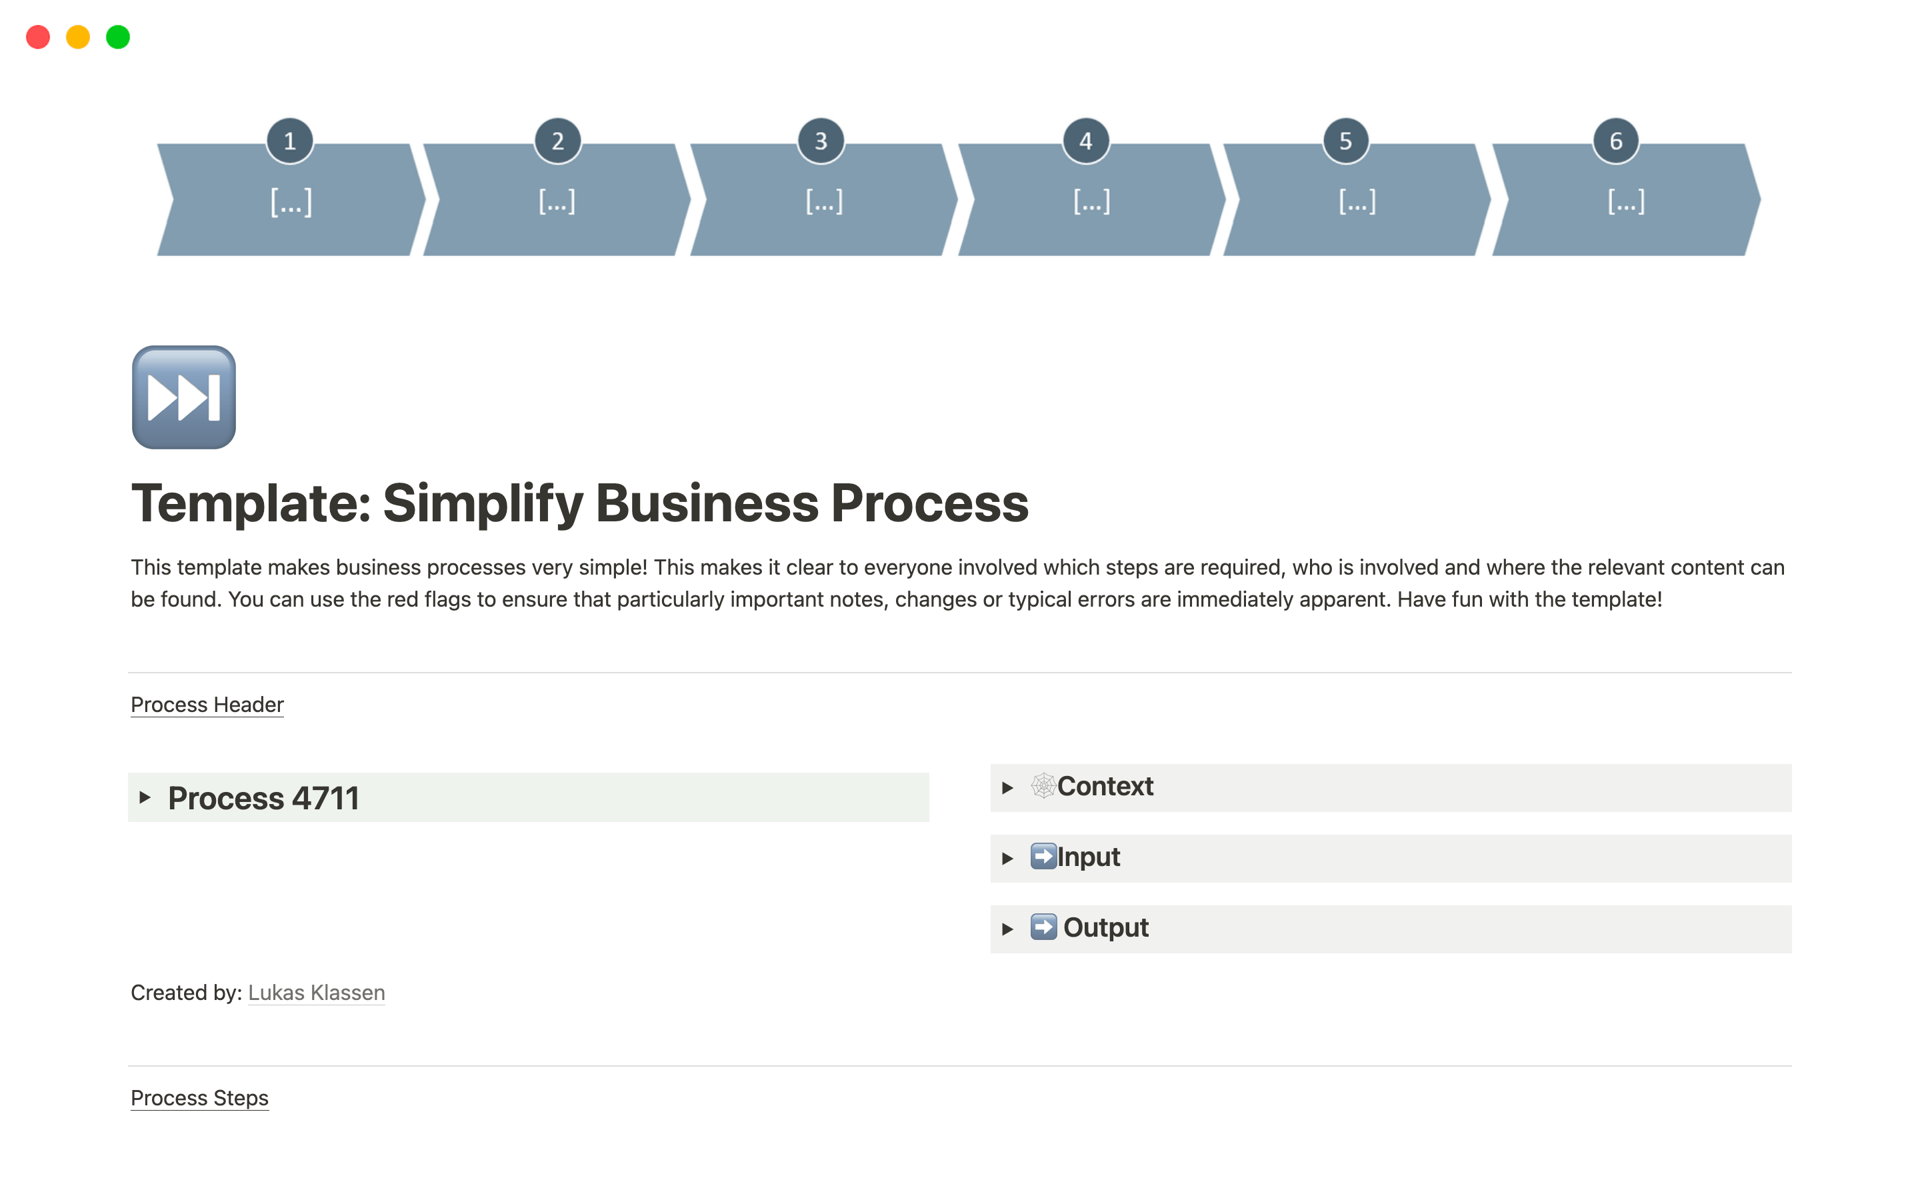 Make your business easy again! This Template helps you to reduce complexity in your business processes.